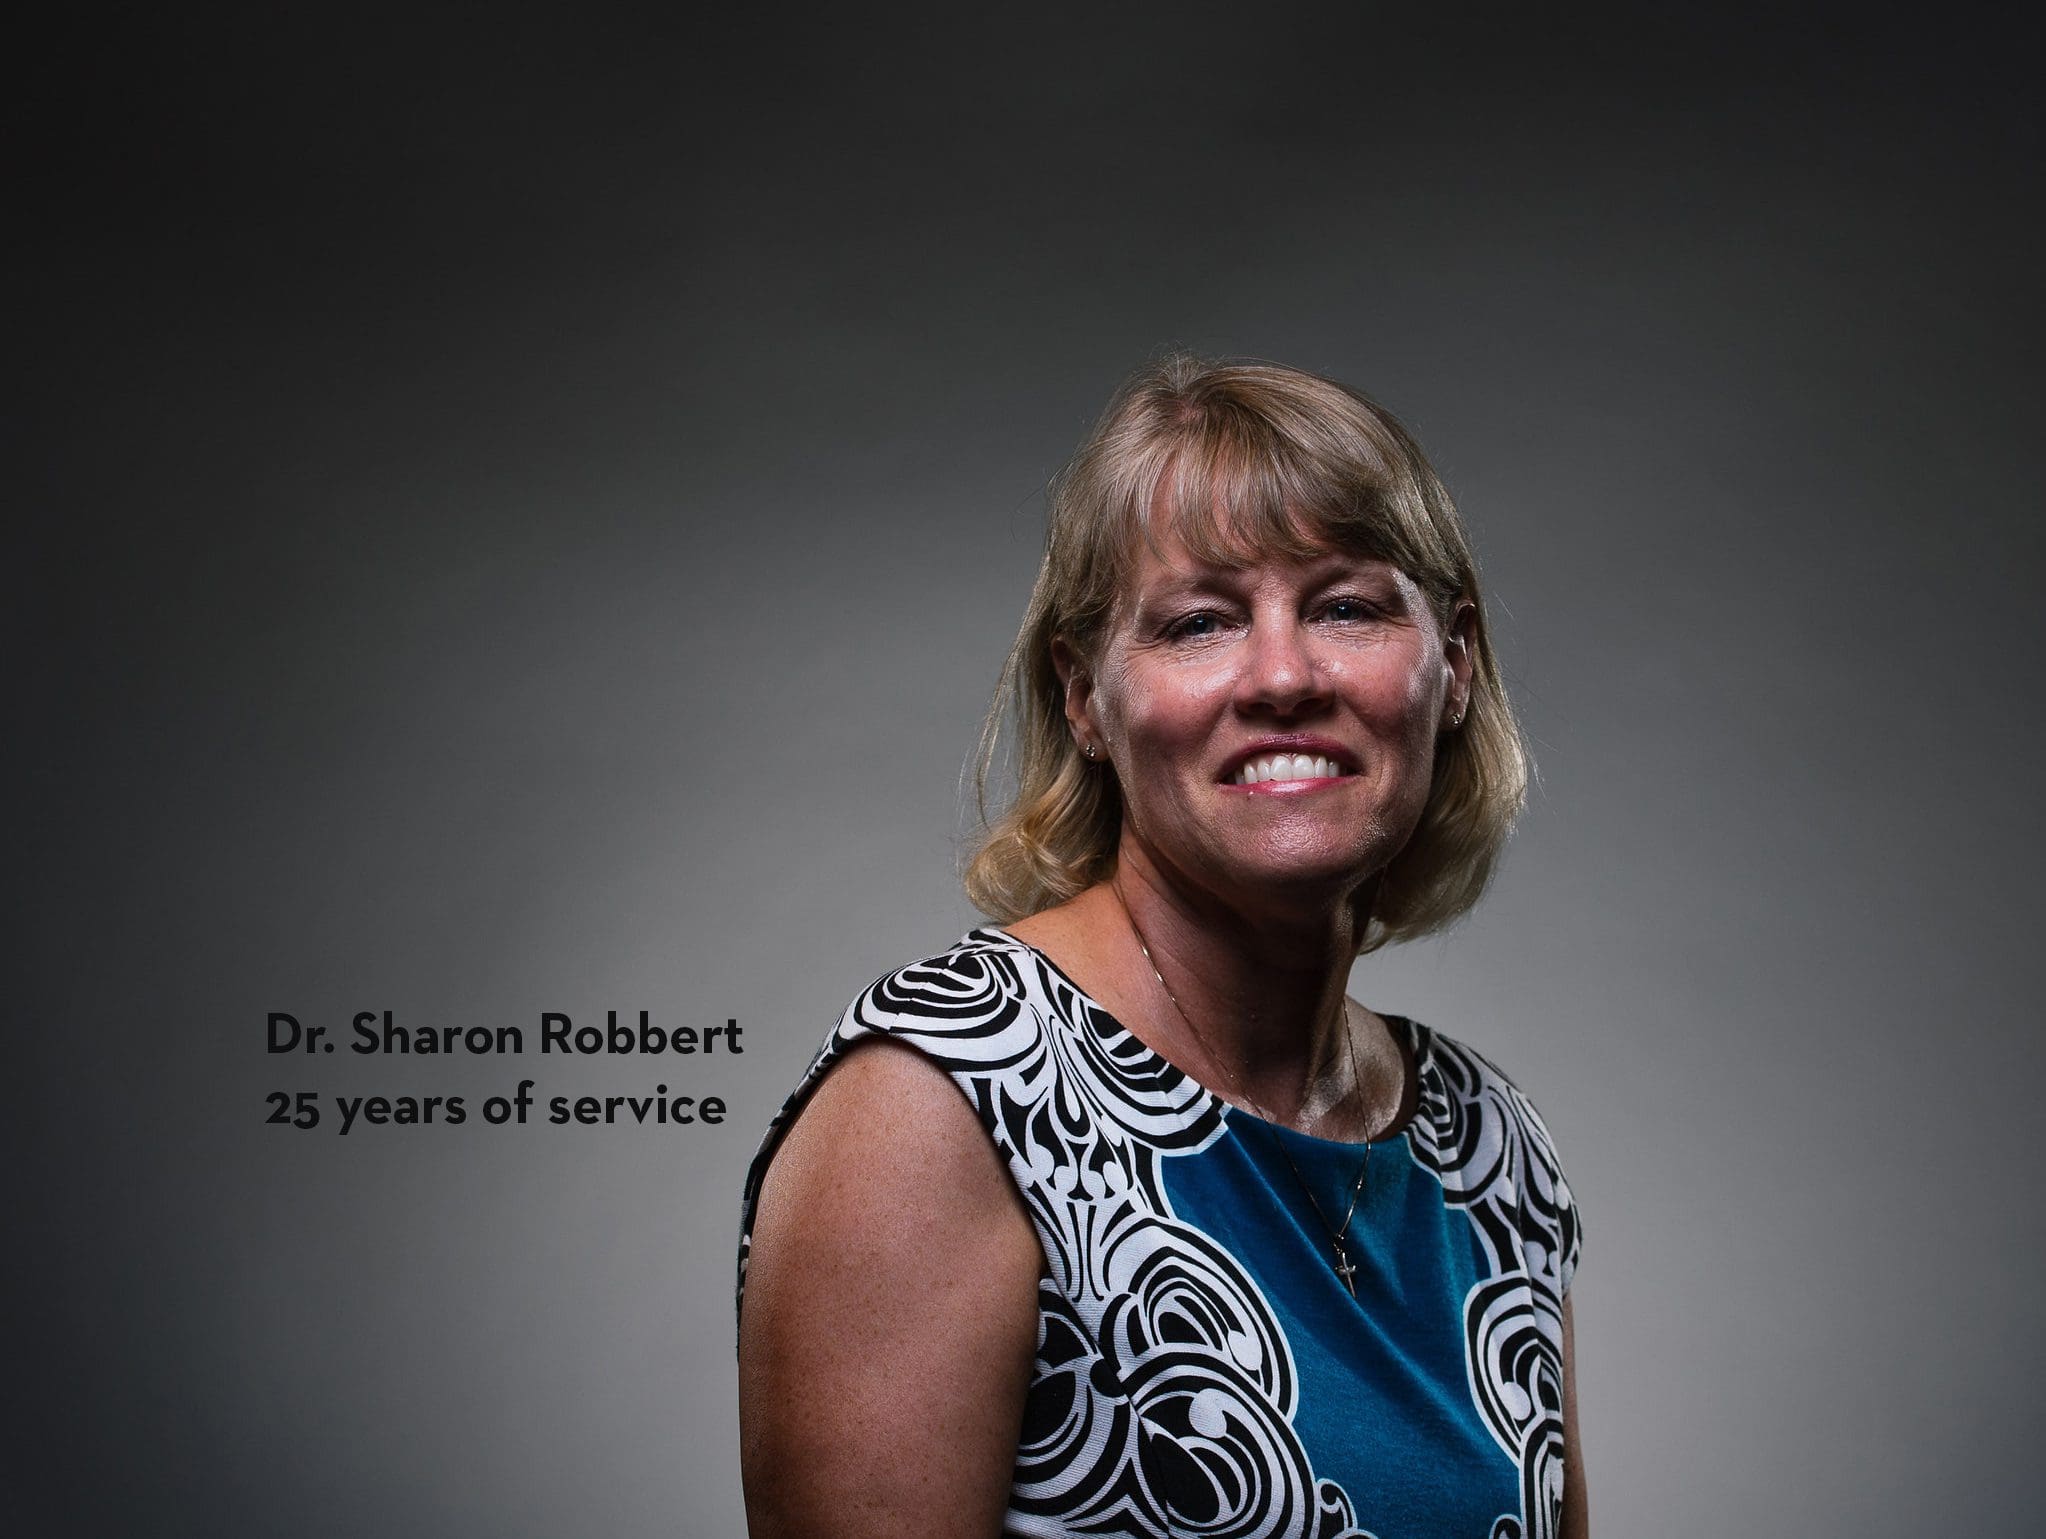 Dr. Sharon Robbert - 25 years of service